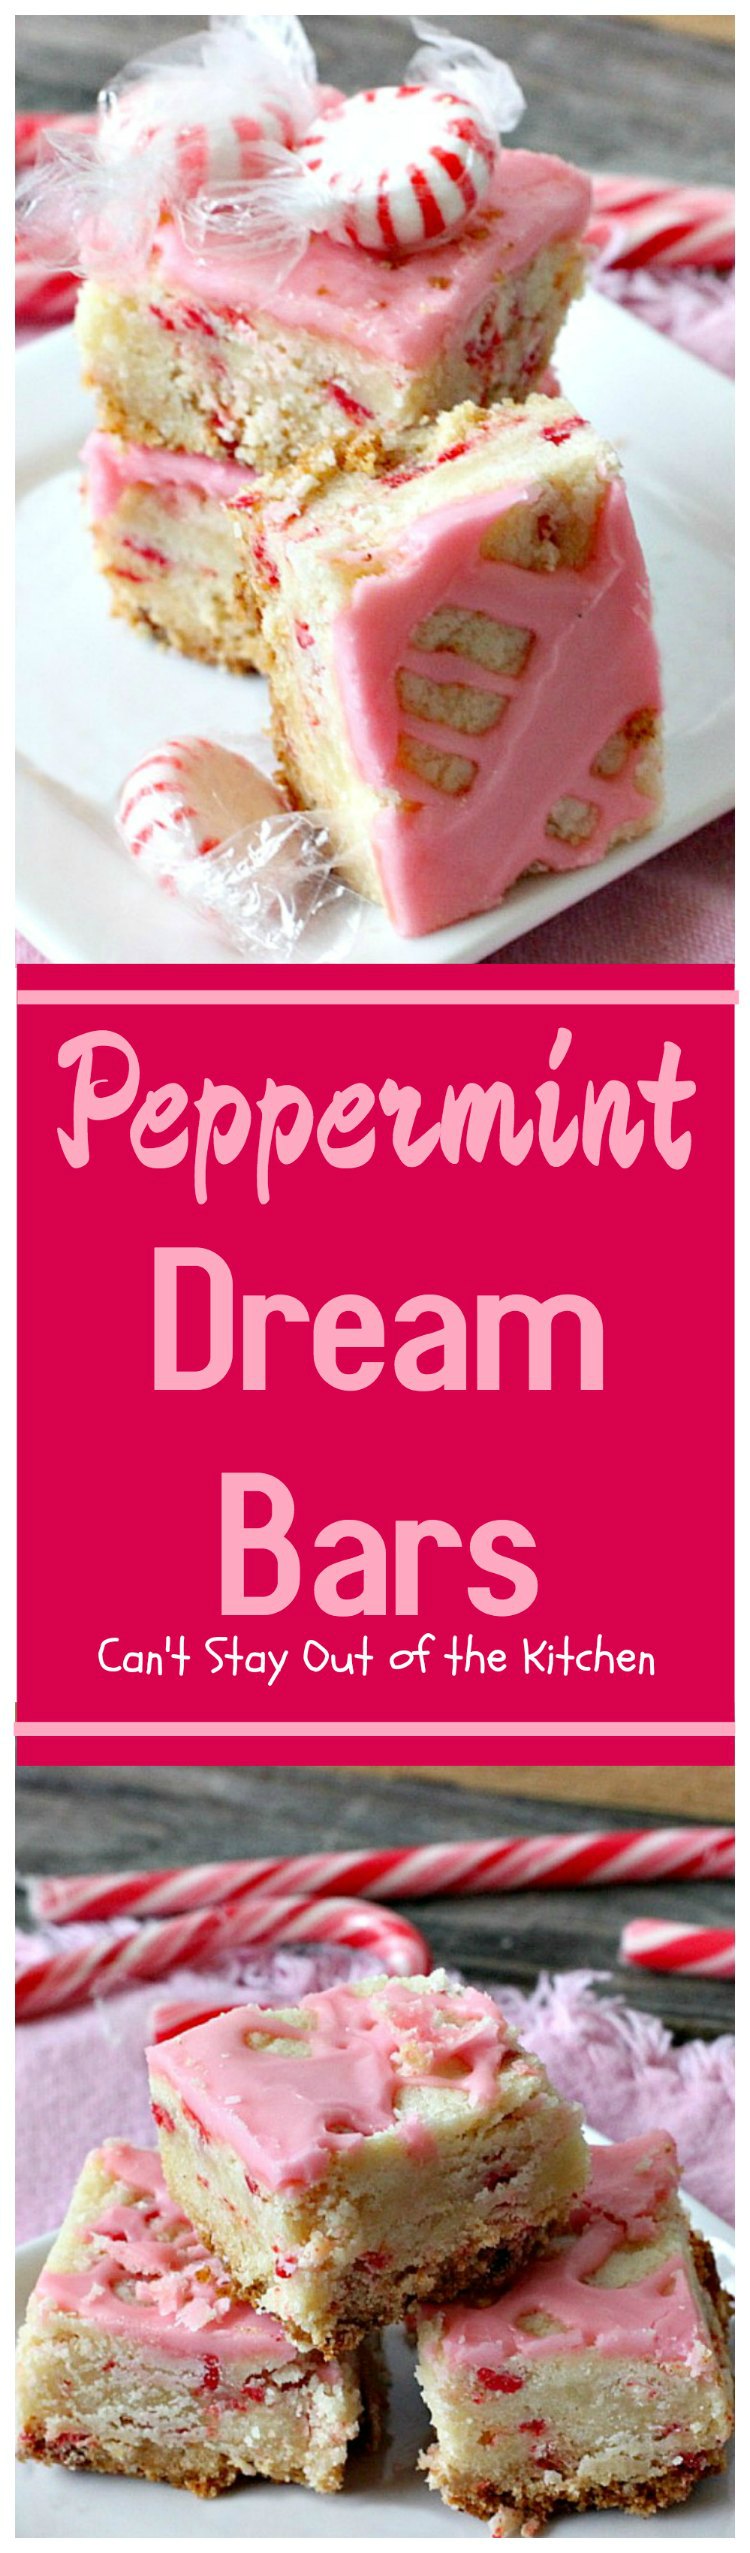 Peppermint Dream Bars | Can't Stay Out of the Kitchen